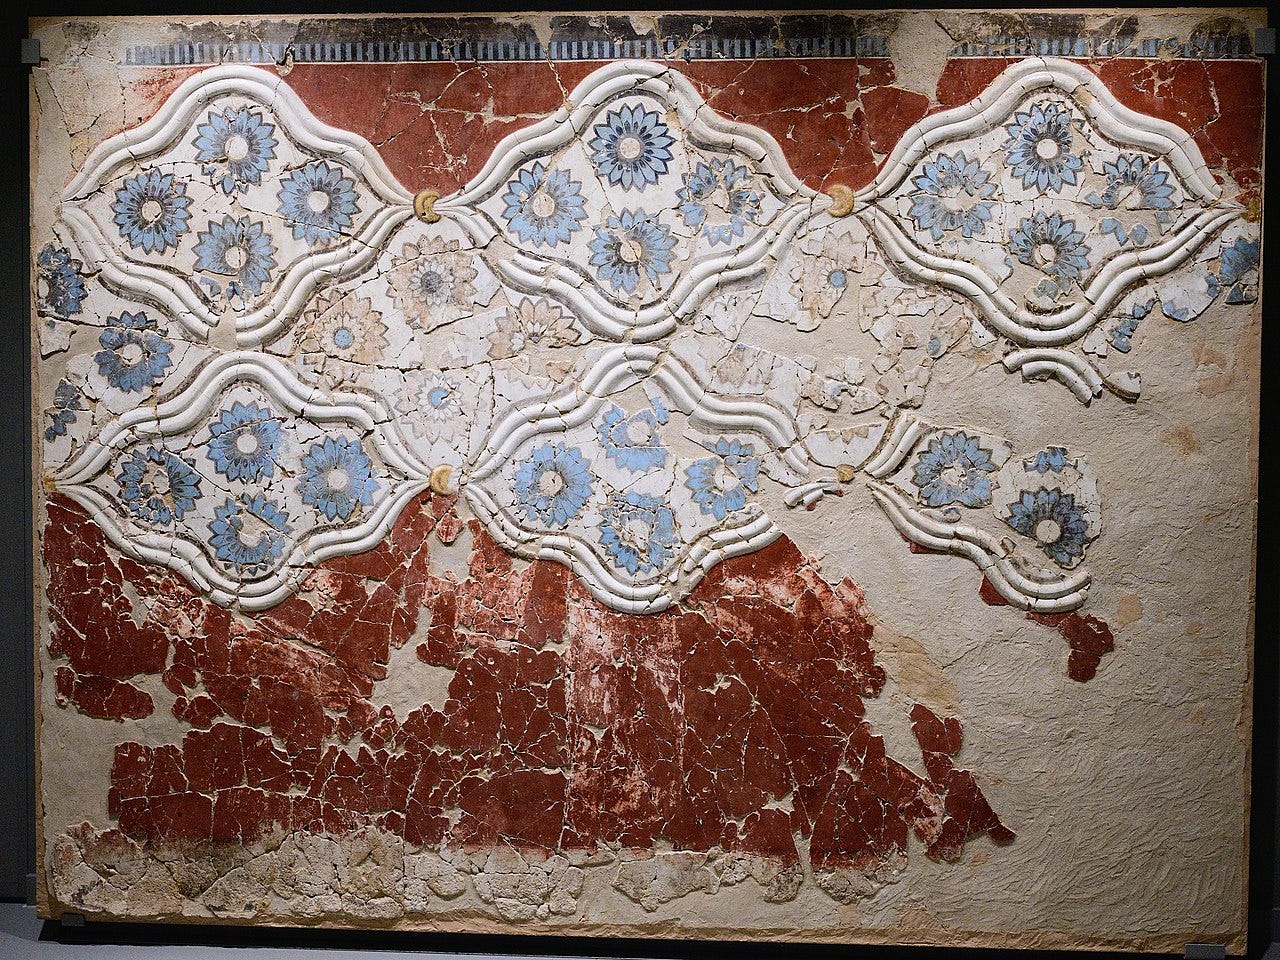 Minoan fresco from Akrotiri with blue and lavender rosettes within 3D wavy borders, surrounded by dark red wall